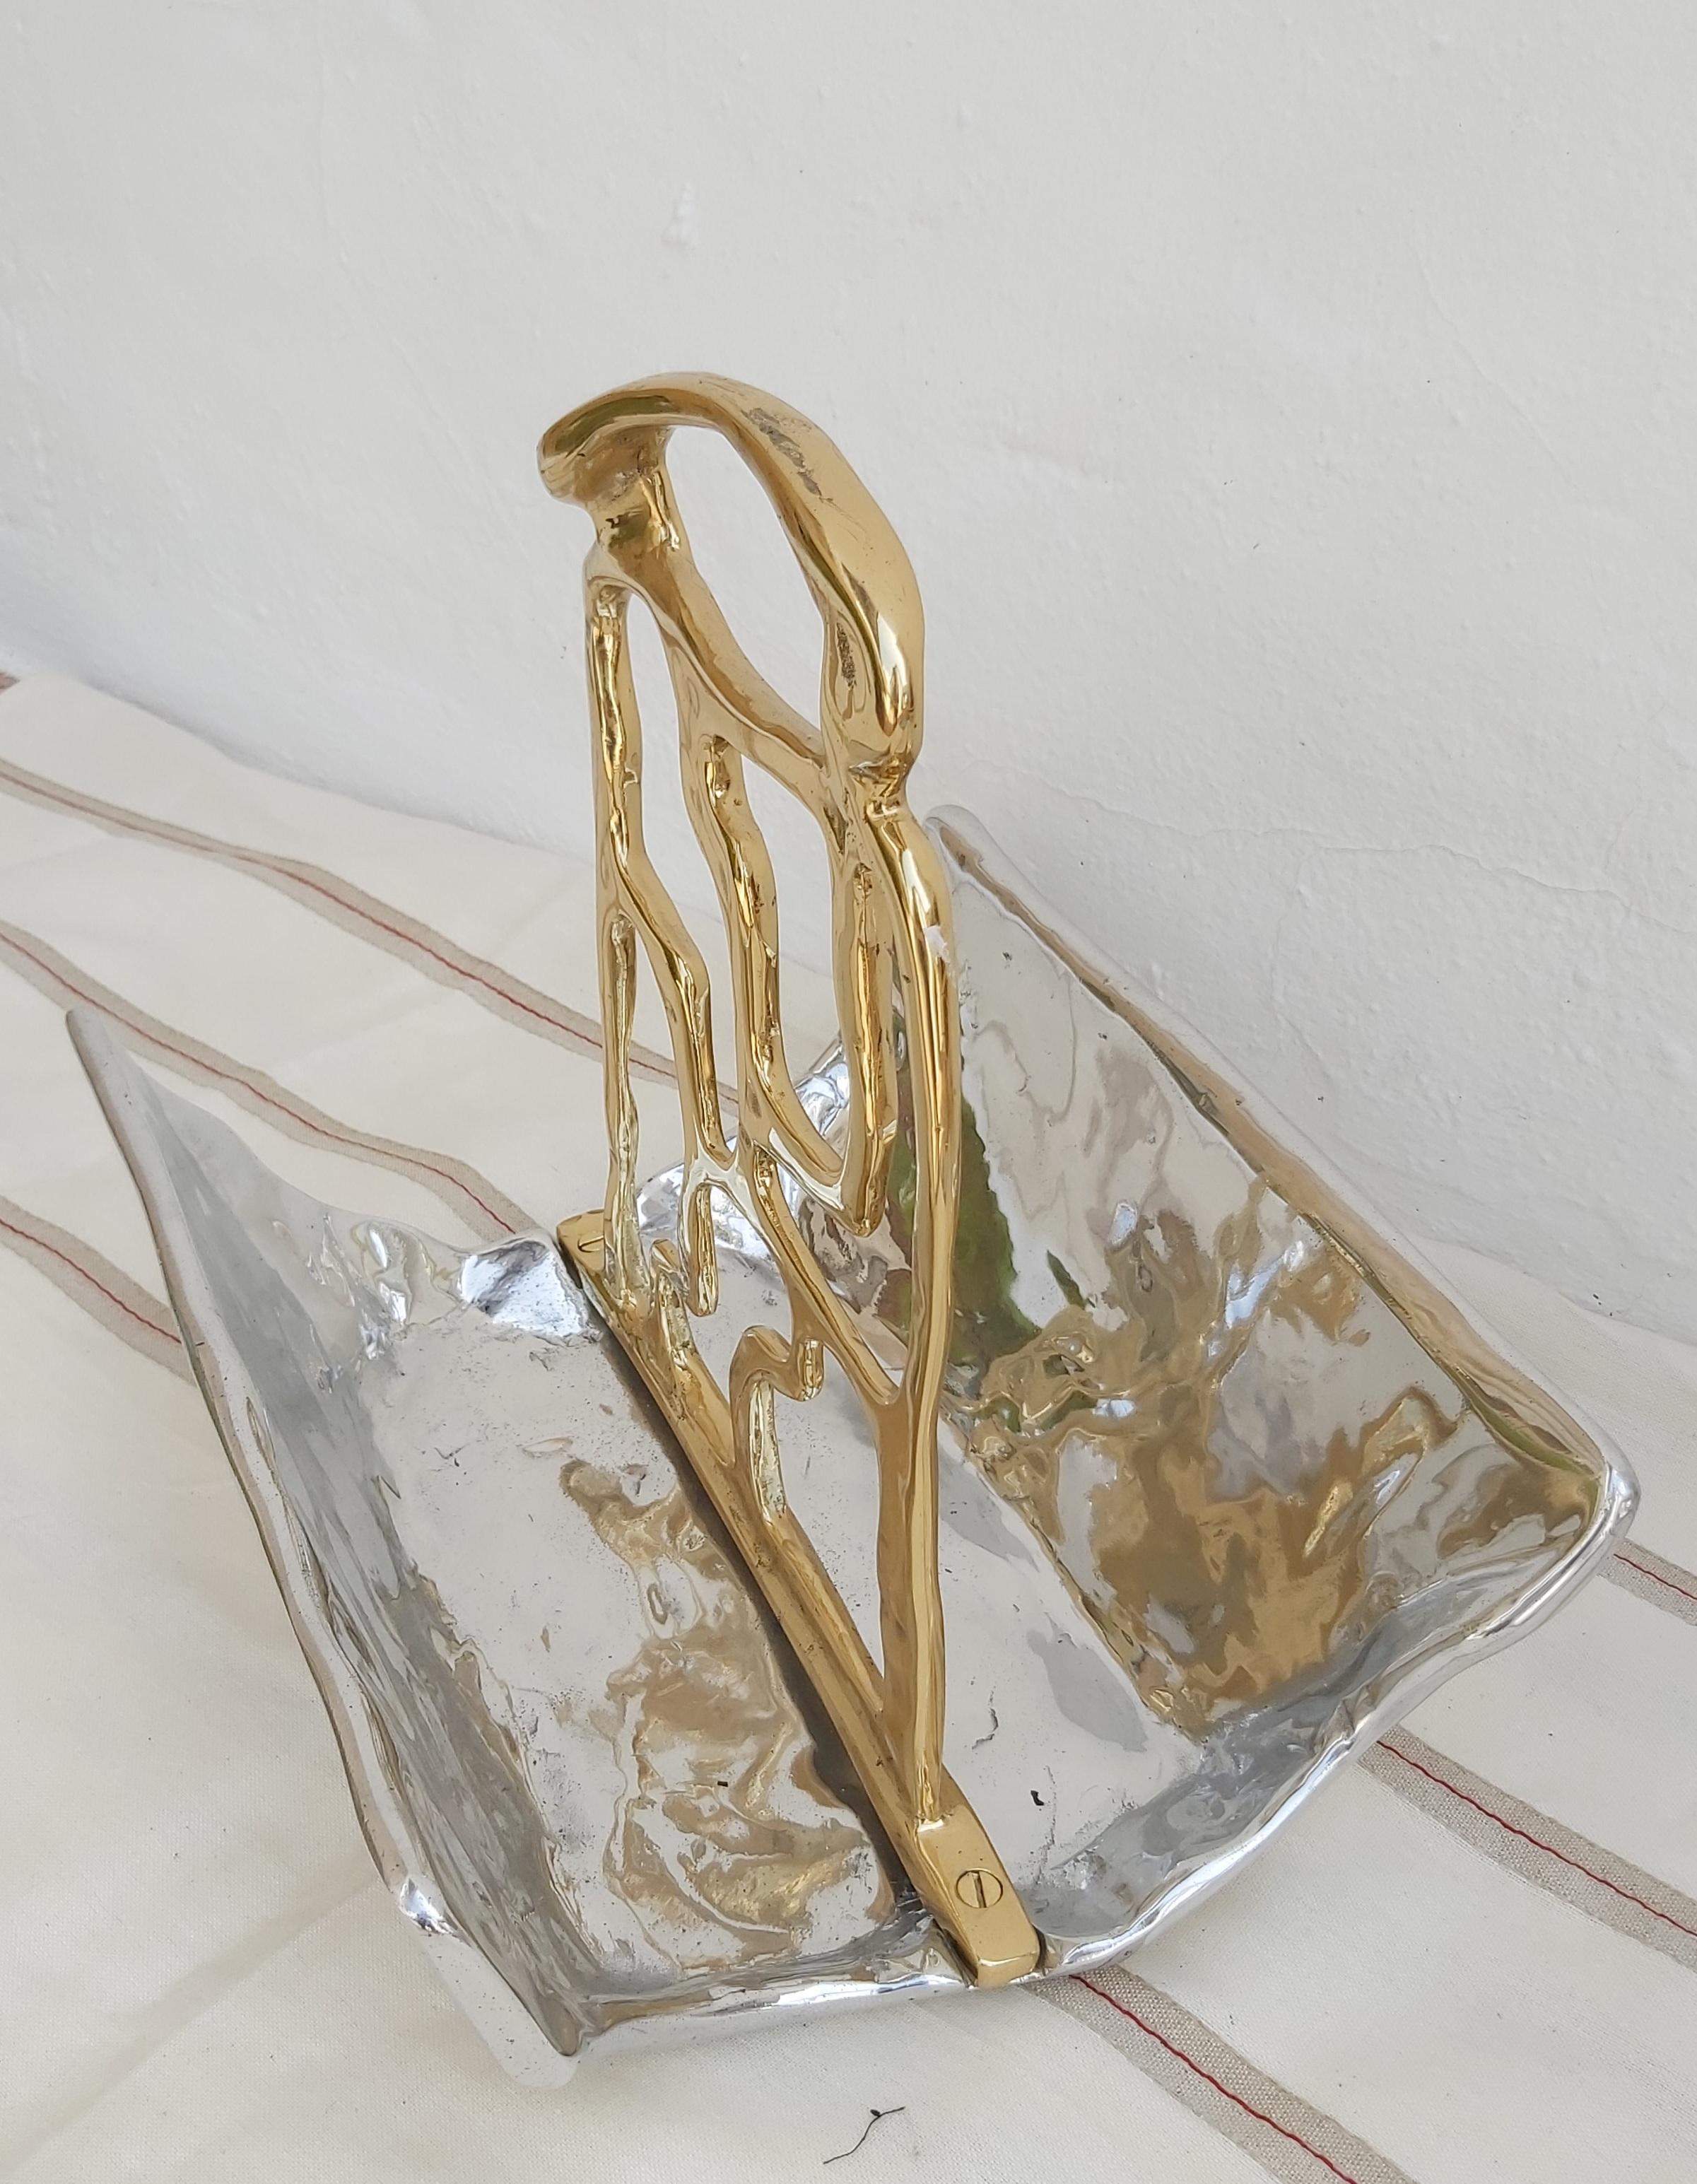 Contemporary Metal Brutalist Magazine Rack Solid Cast Brass and Aluminium Handmade in Spain For Sale